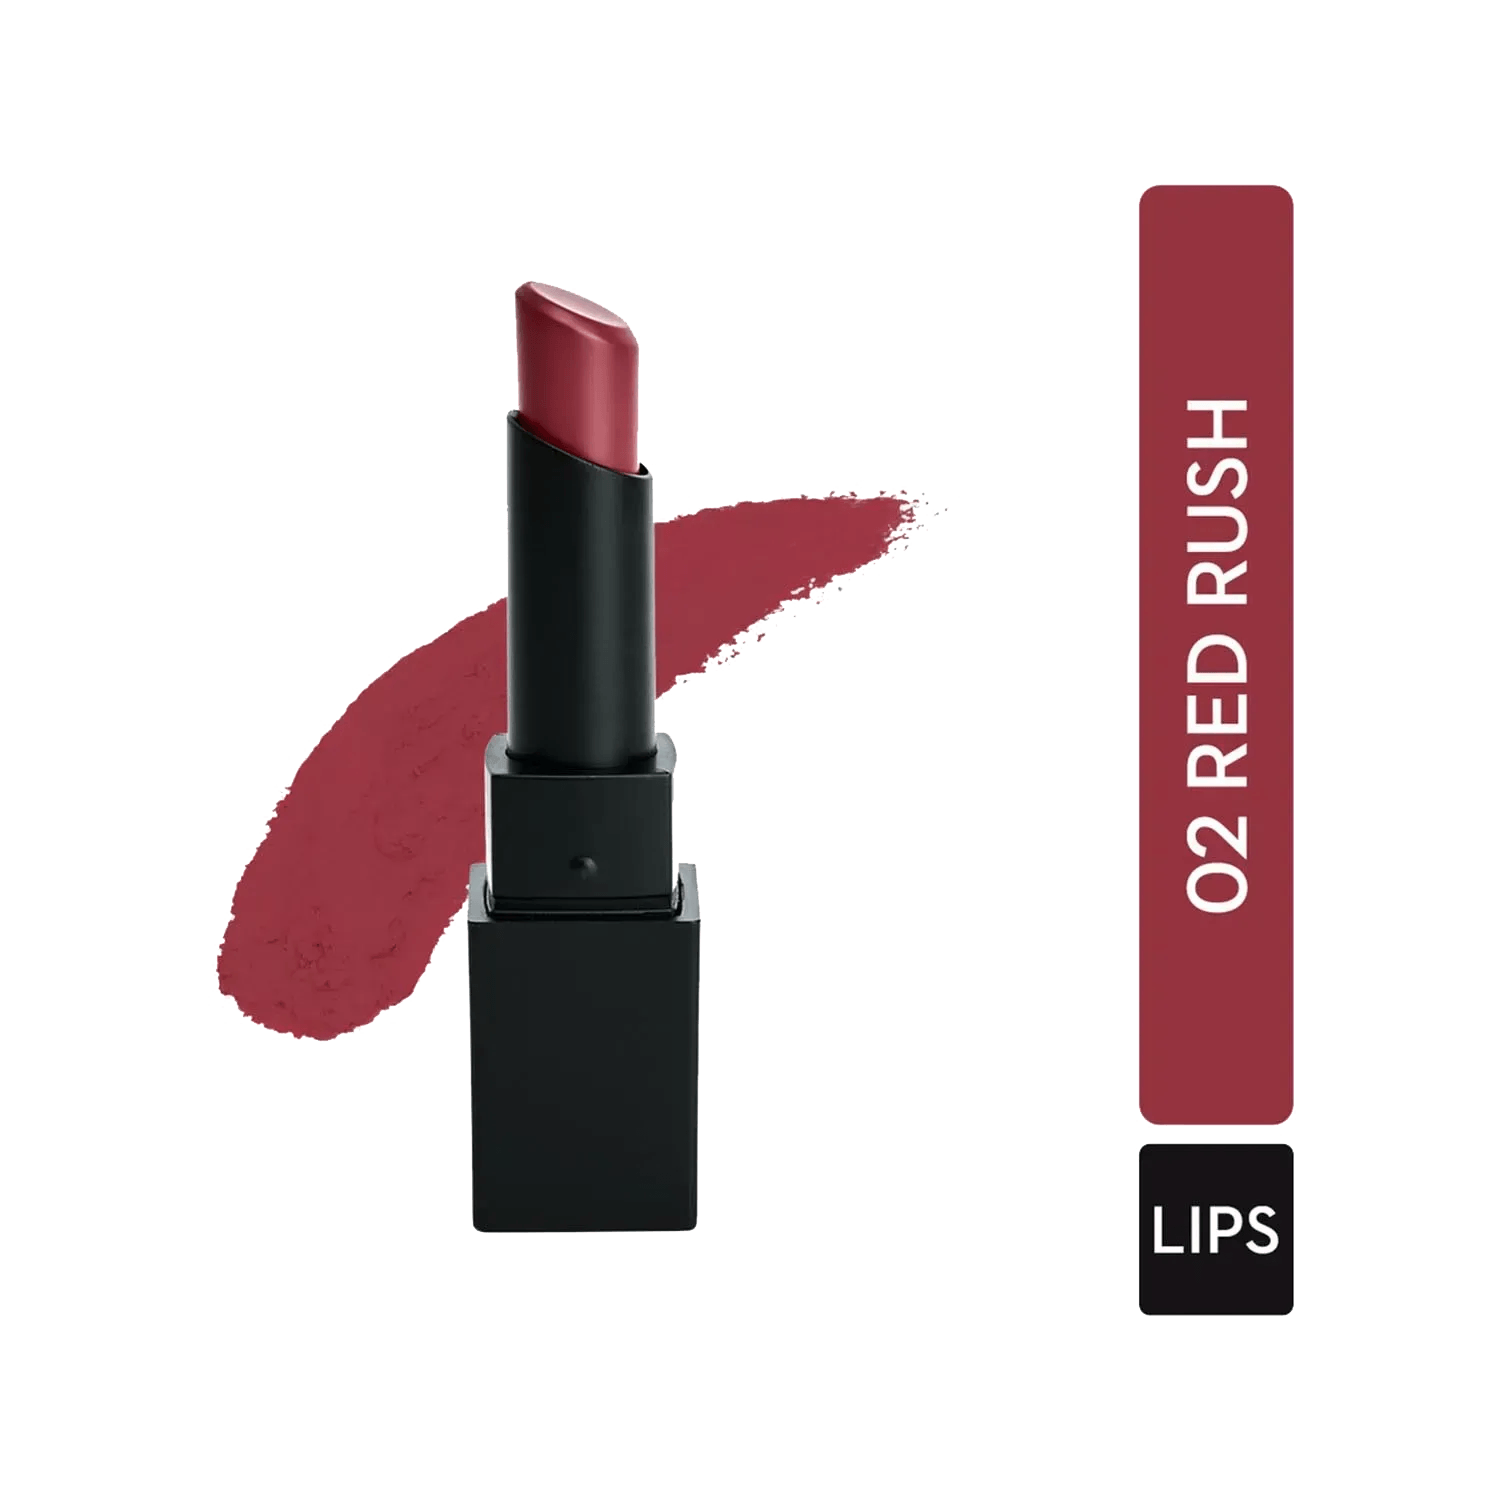 SUGAR Cosmetics | SUGAR Cosmetics Nothing Else Matter Longwear Lipstick - 02 Red Rush (Red with Hints of Pink, Orange) (3.5g)